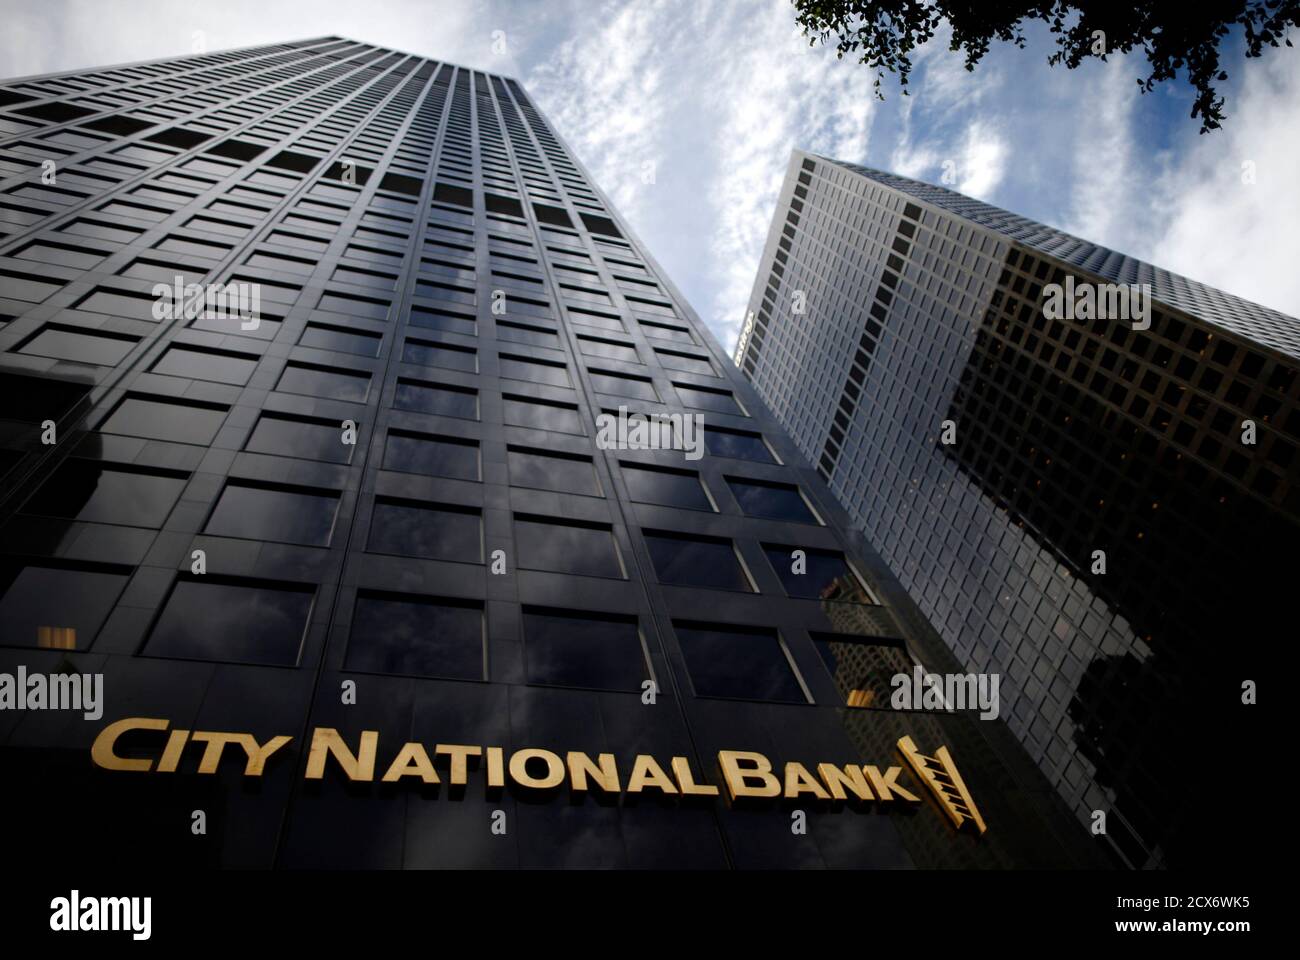 A City National Bank office is seen in downtown Los Angeles, California January 22, 2015. Royal Bank of Canada is pushing deeper into the U.S. wealth management business, saying on Thursday it will buy Los Angeles-based City National Corp for $5.4 billion in a deal that targets City's stable of high-net worth clients. REUTERS/Lucy Nicholson (UNITED STATES - Tags: BUSINESS) Stock Photo